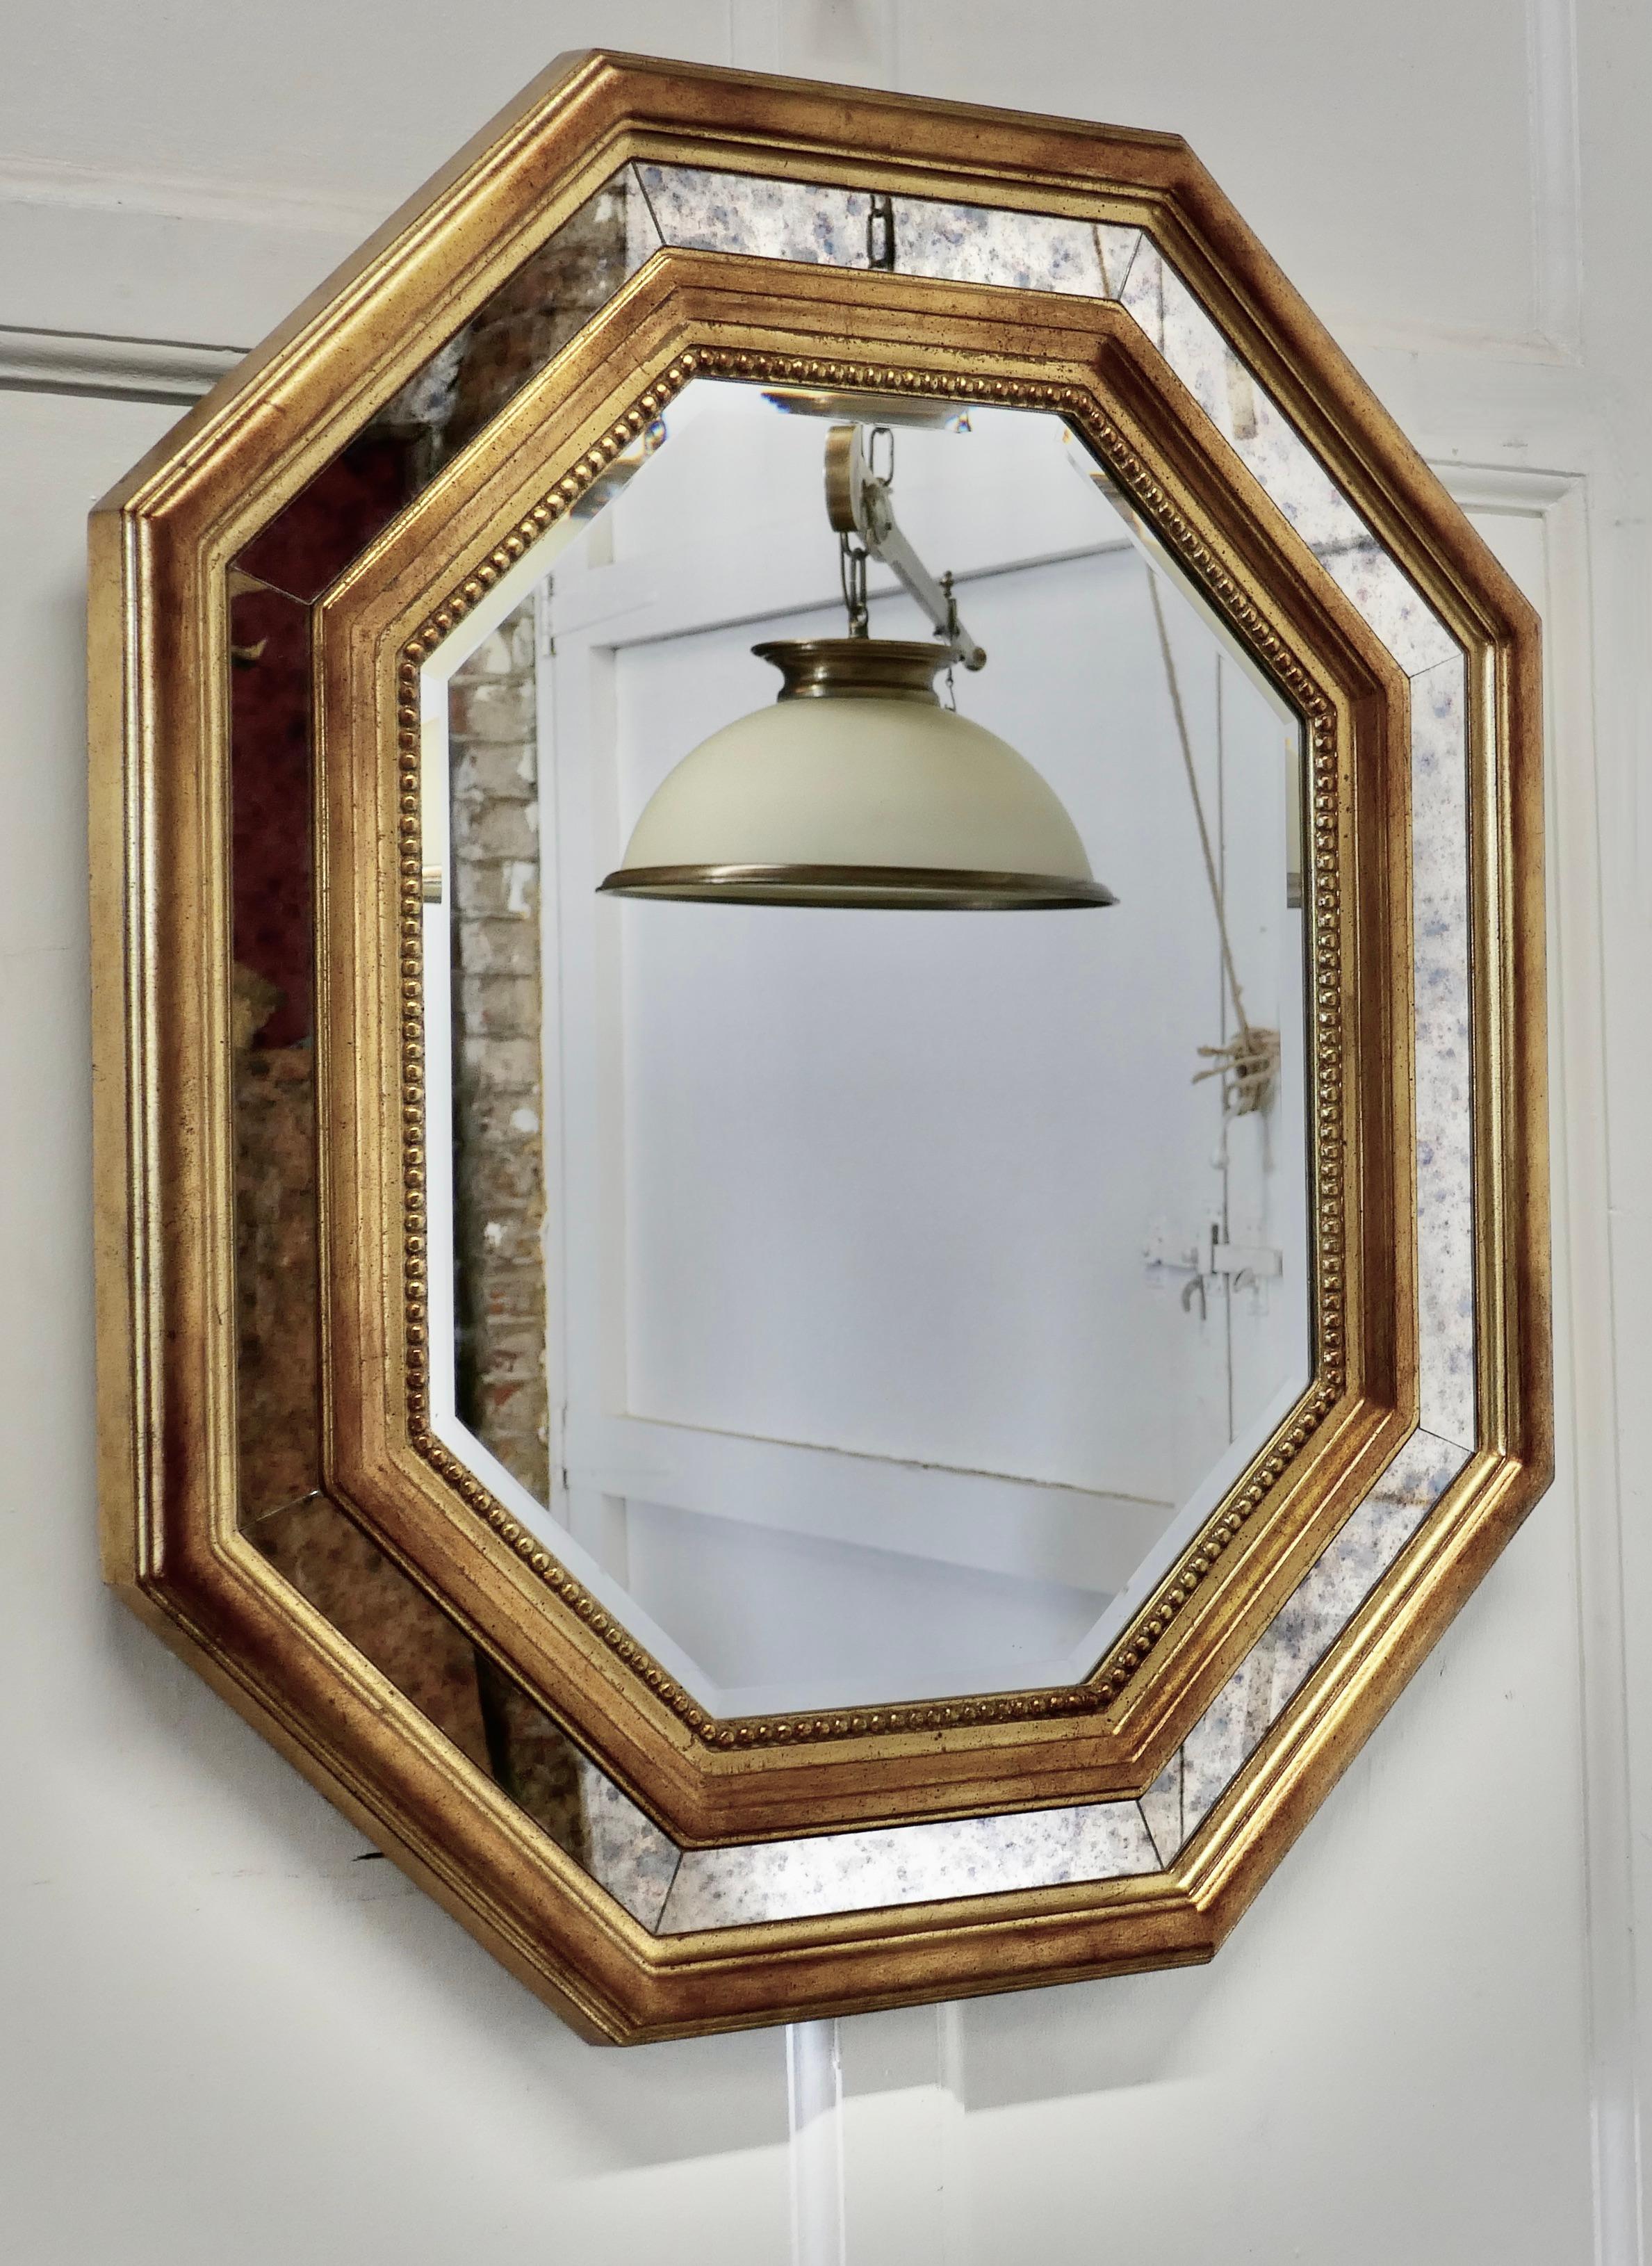 Large French octagonal cushion mirror

This is a lovely and a fine quality cushion Mirror, the frame takes a double form with the mirror between slightly mottled, giving an aged effect
The central Mirror is bevelled, there is very little wear to